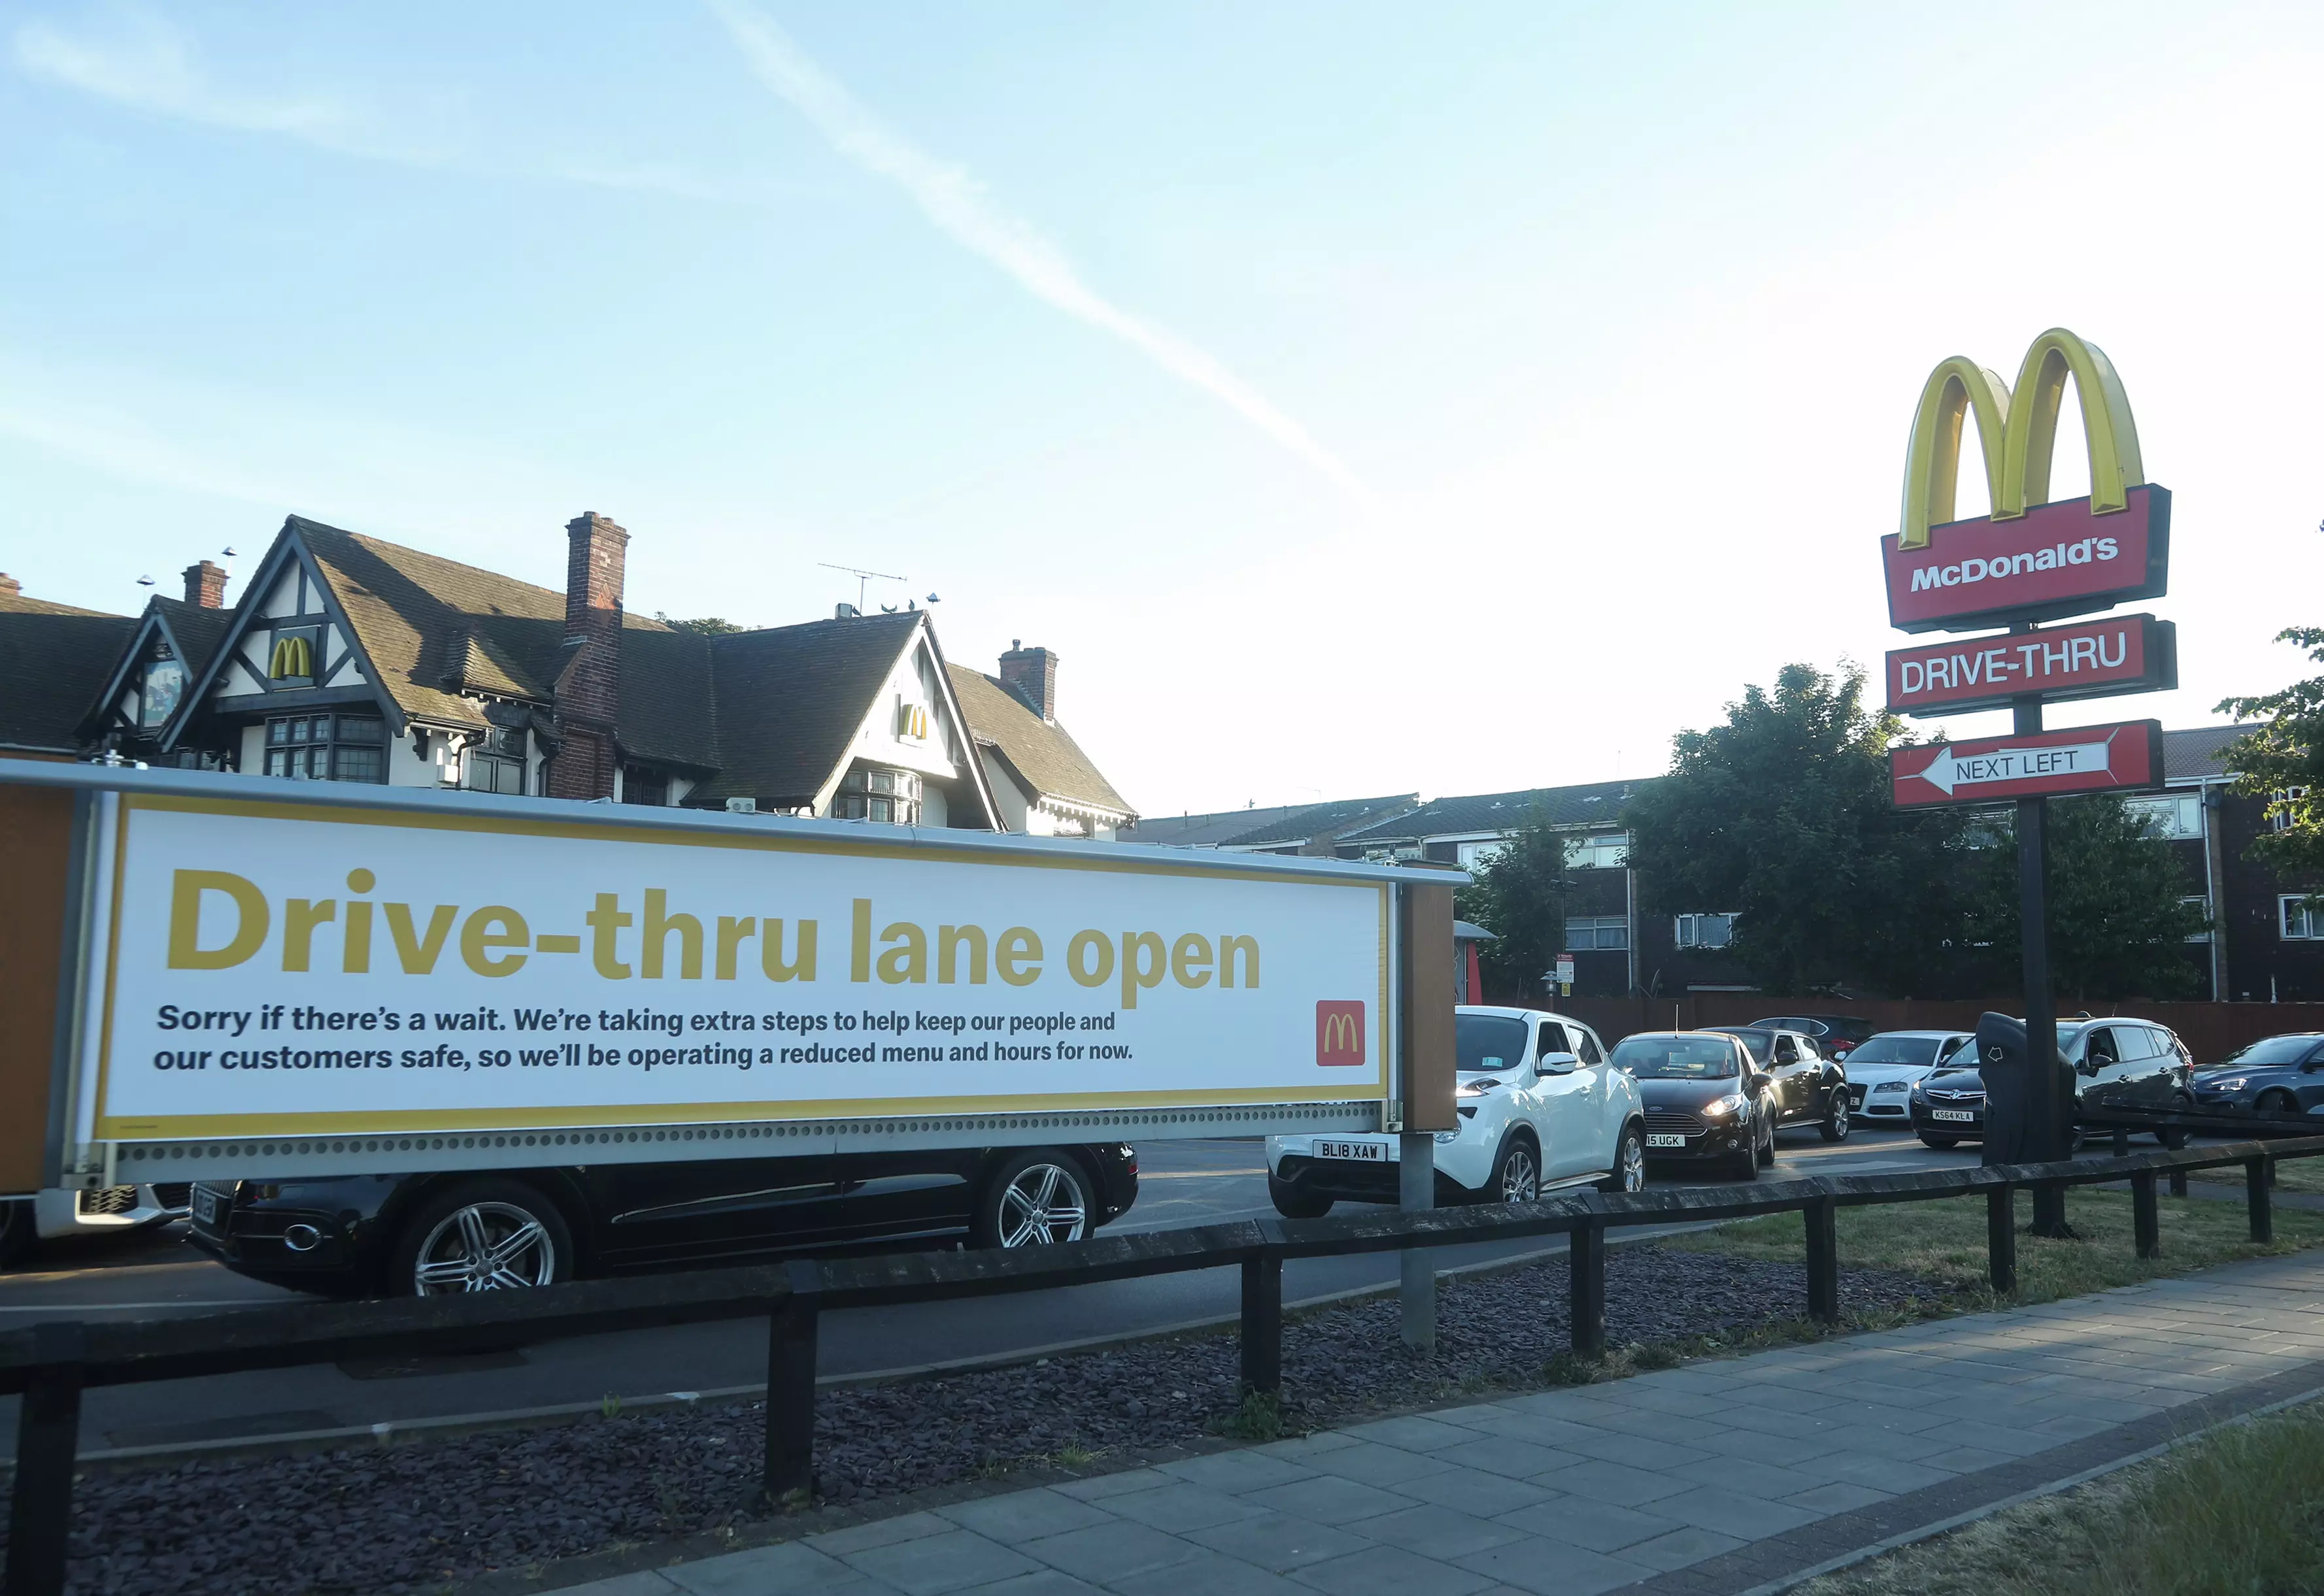 People were happy to queue to get their hands on a Maccies.